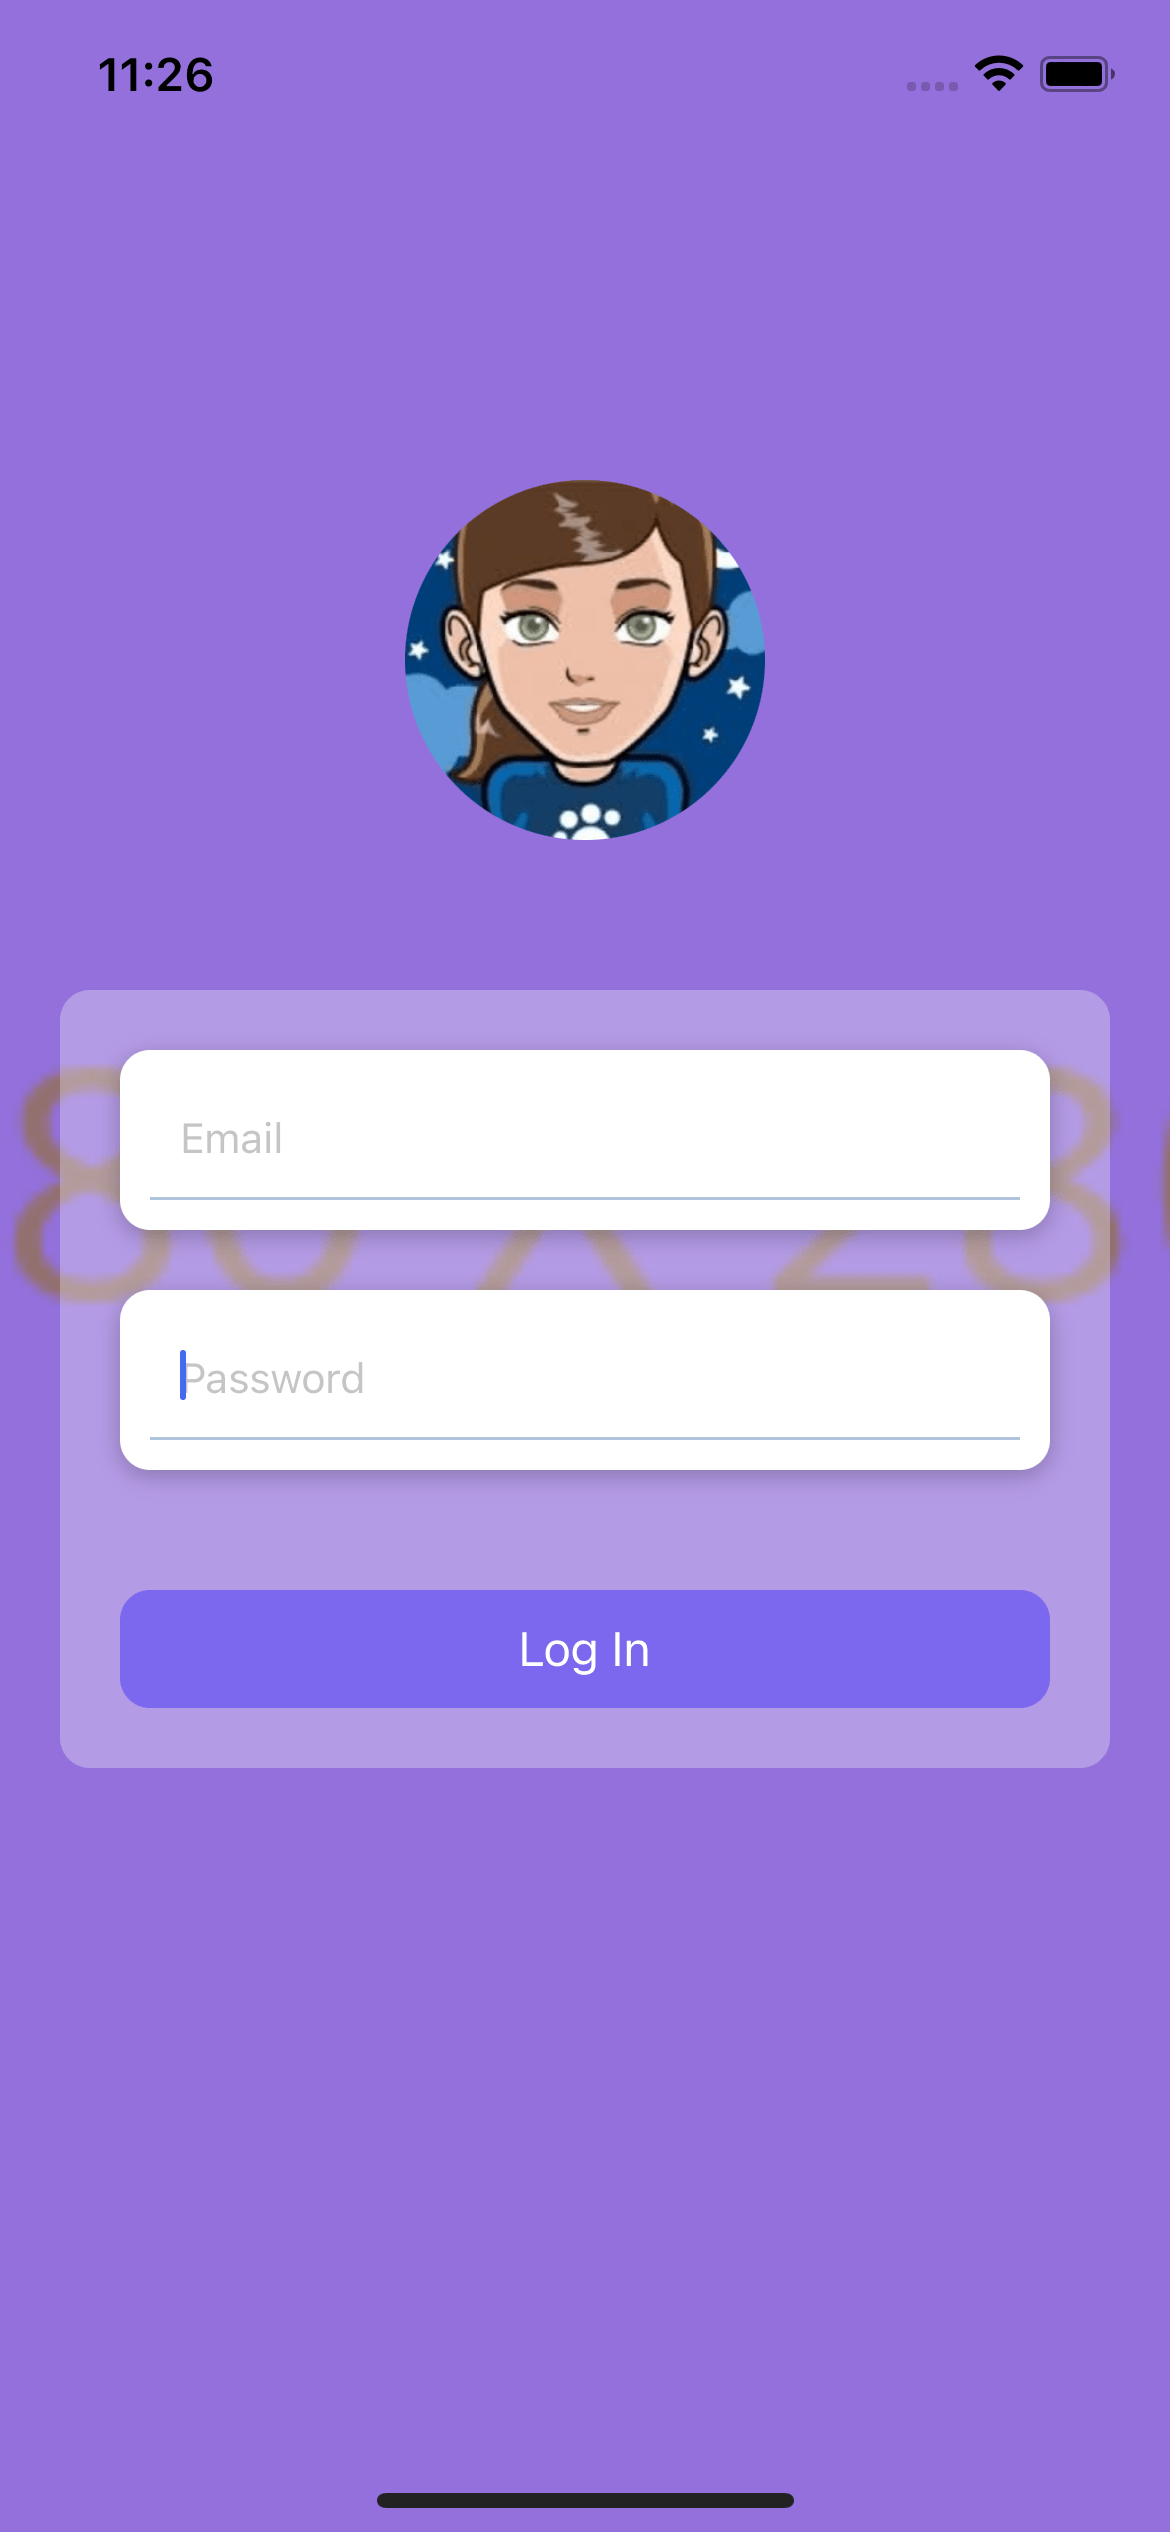 React native template. Login with logo full screen background and inputs inside a card